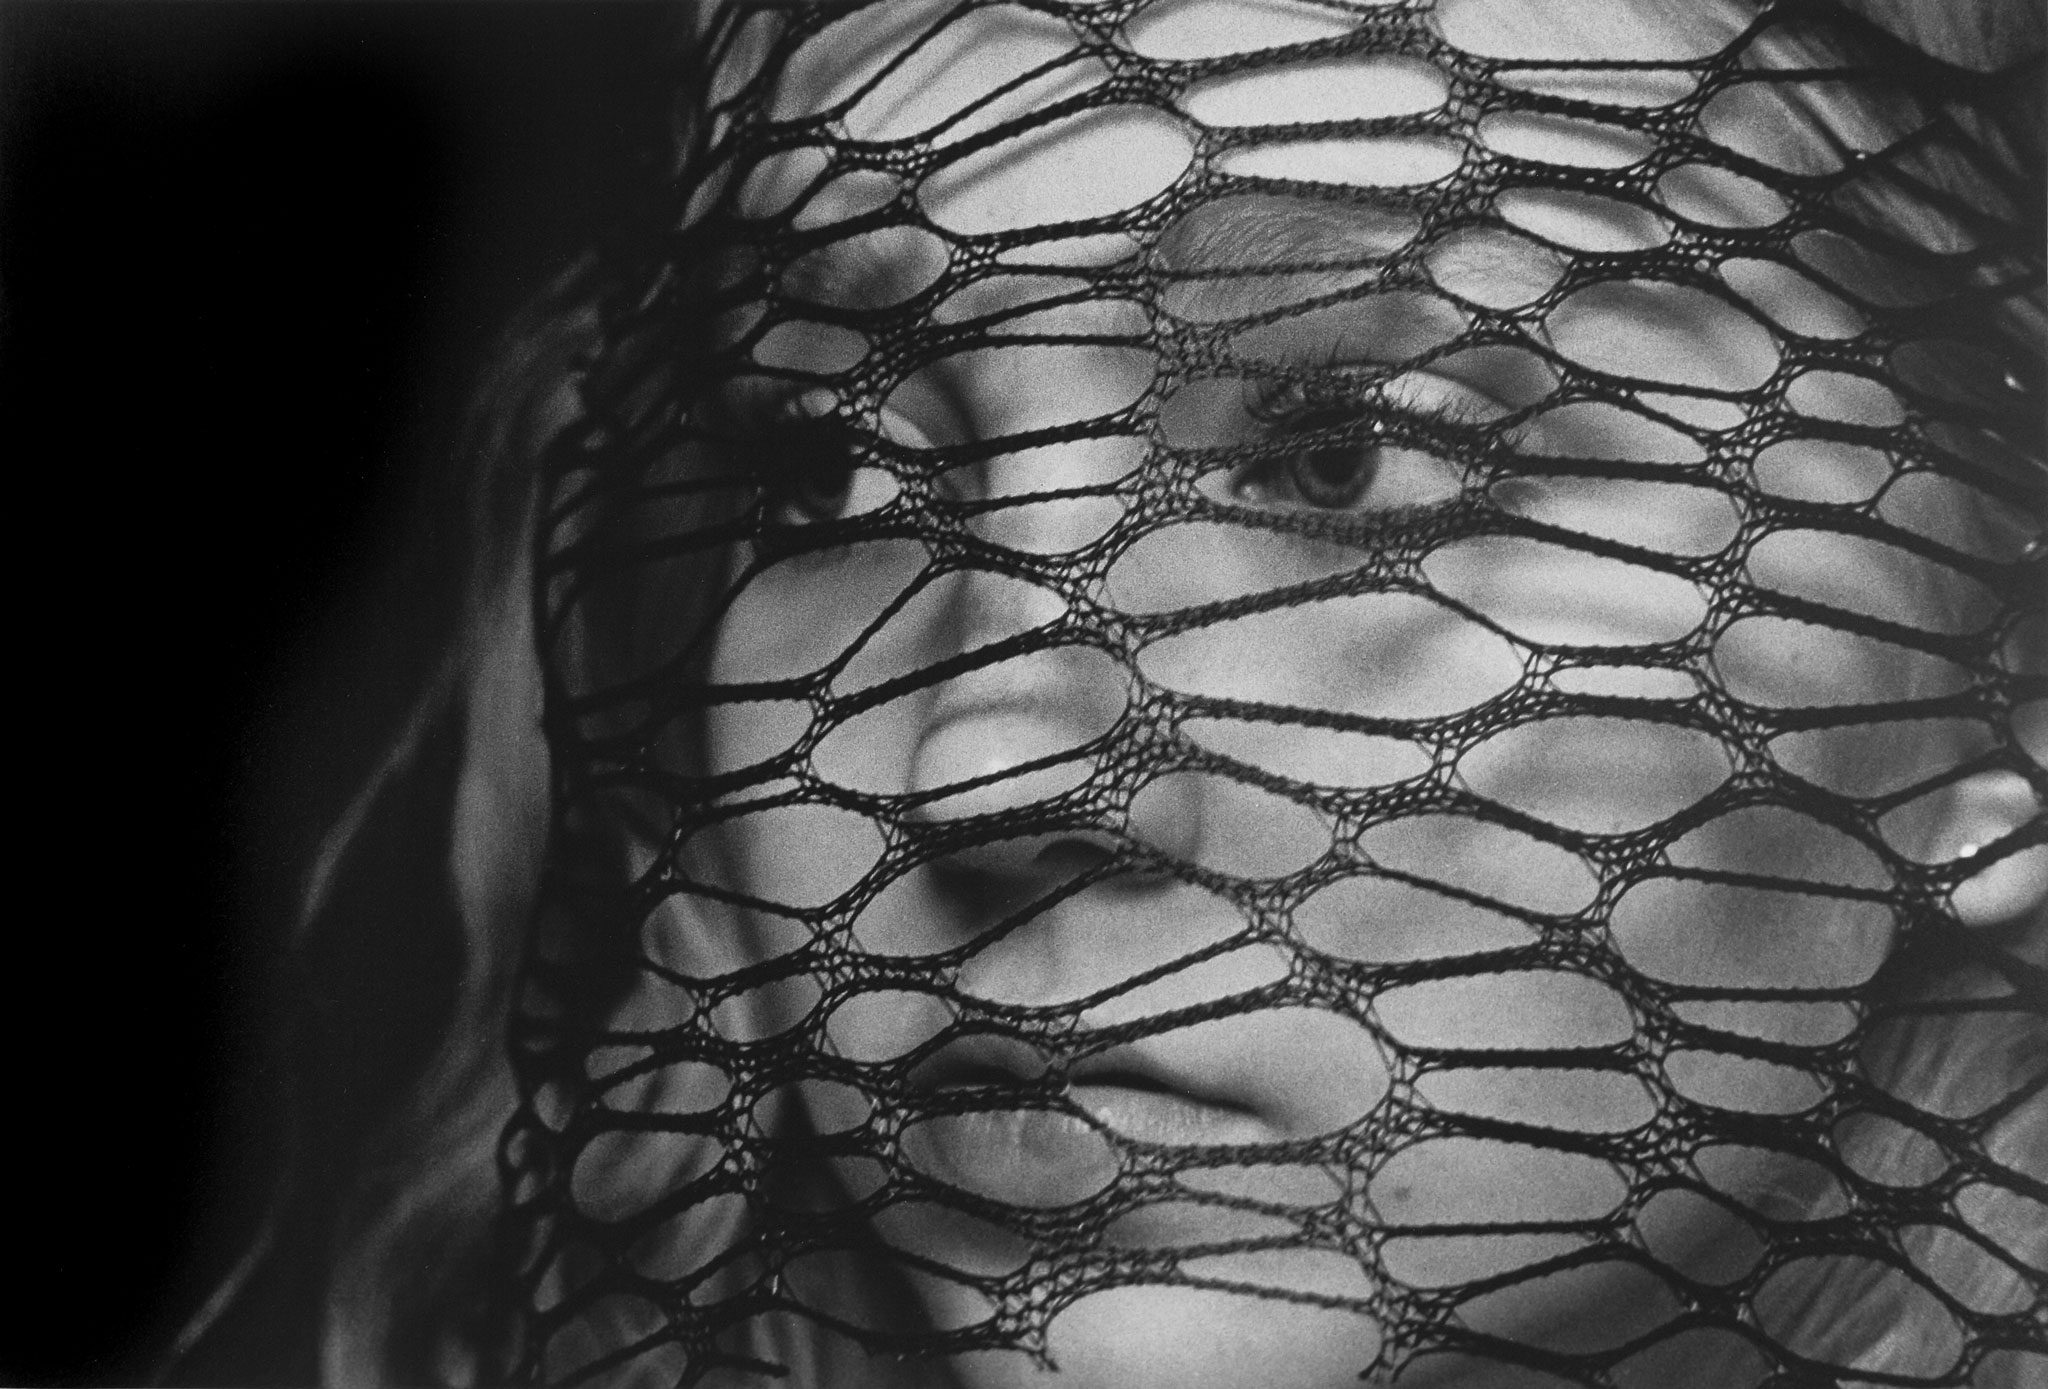 Black and white darkroom print of a woman's face with a lace netting covering it and creating a pattern